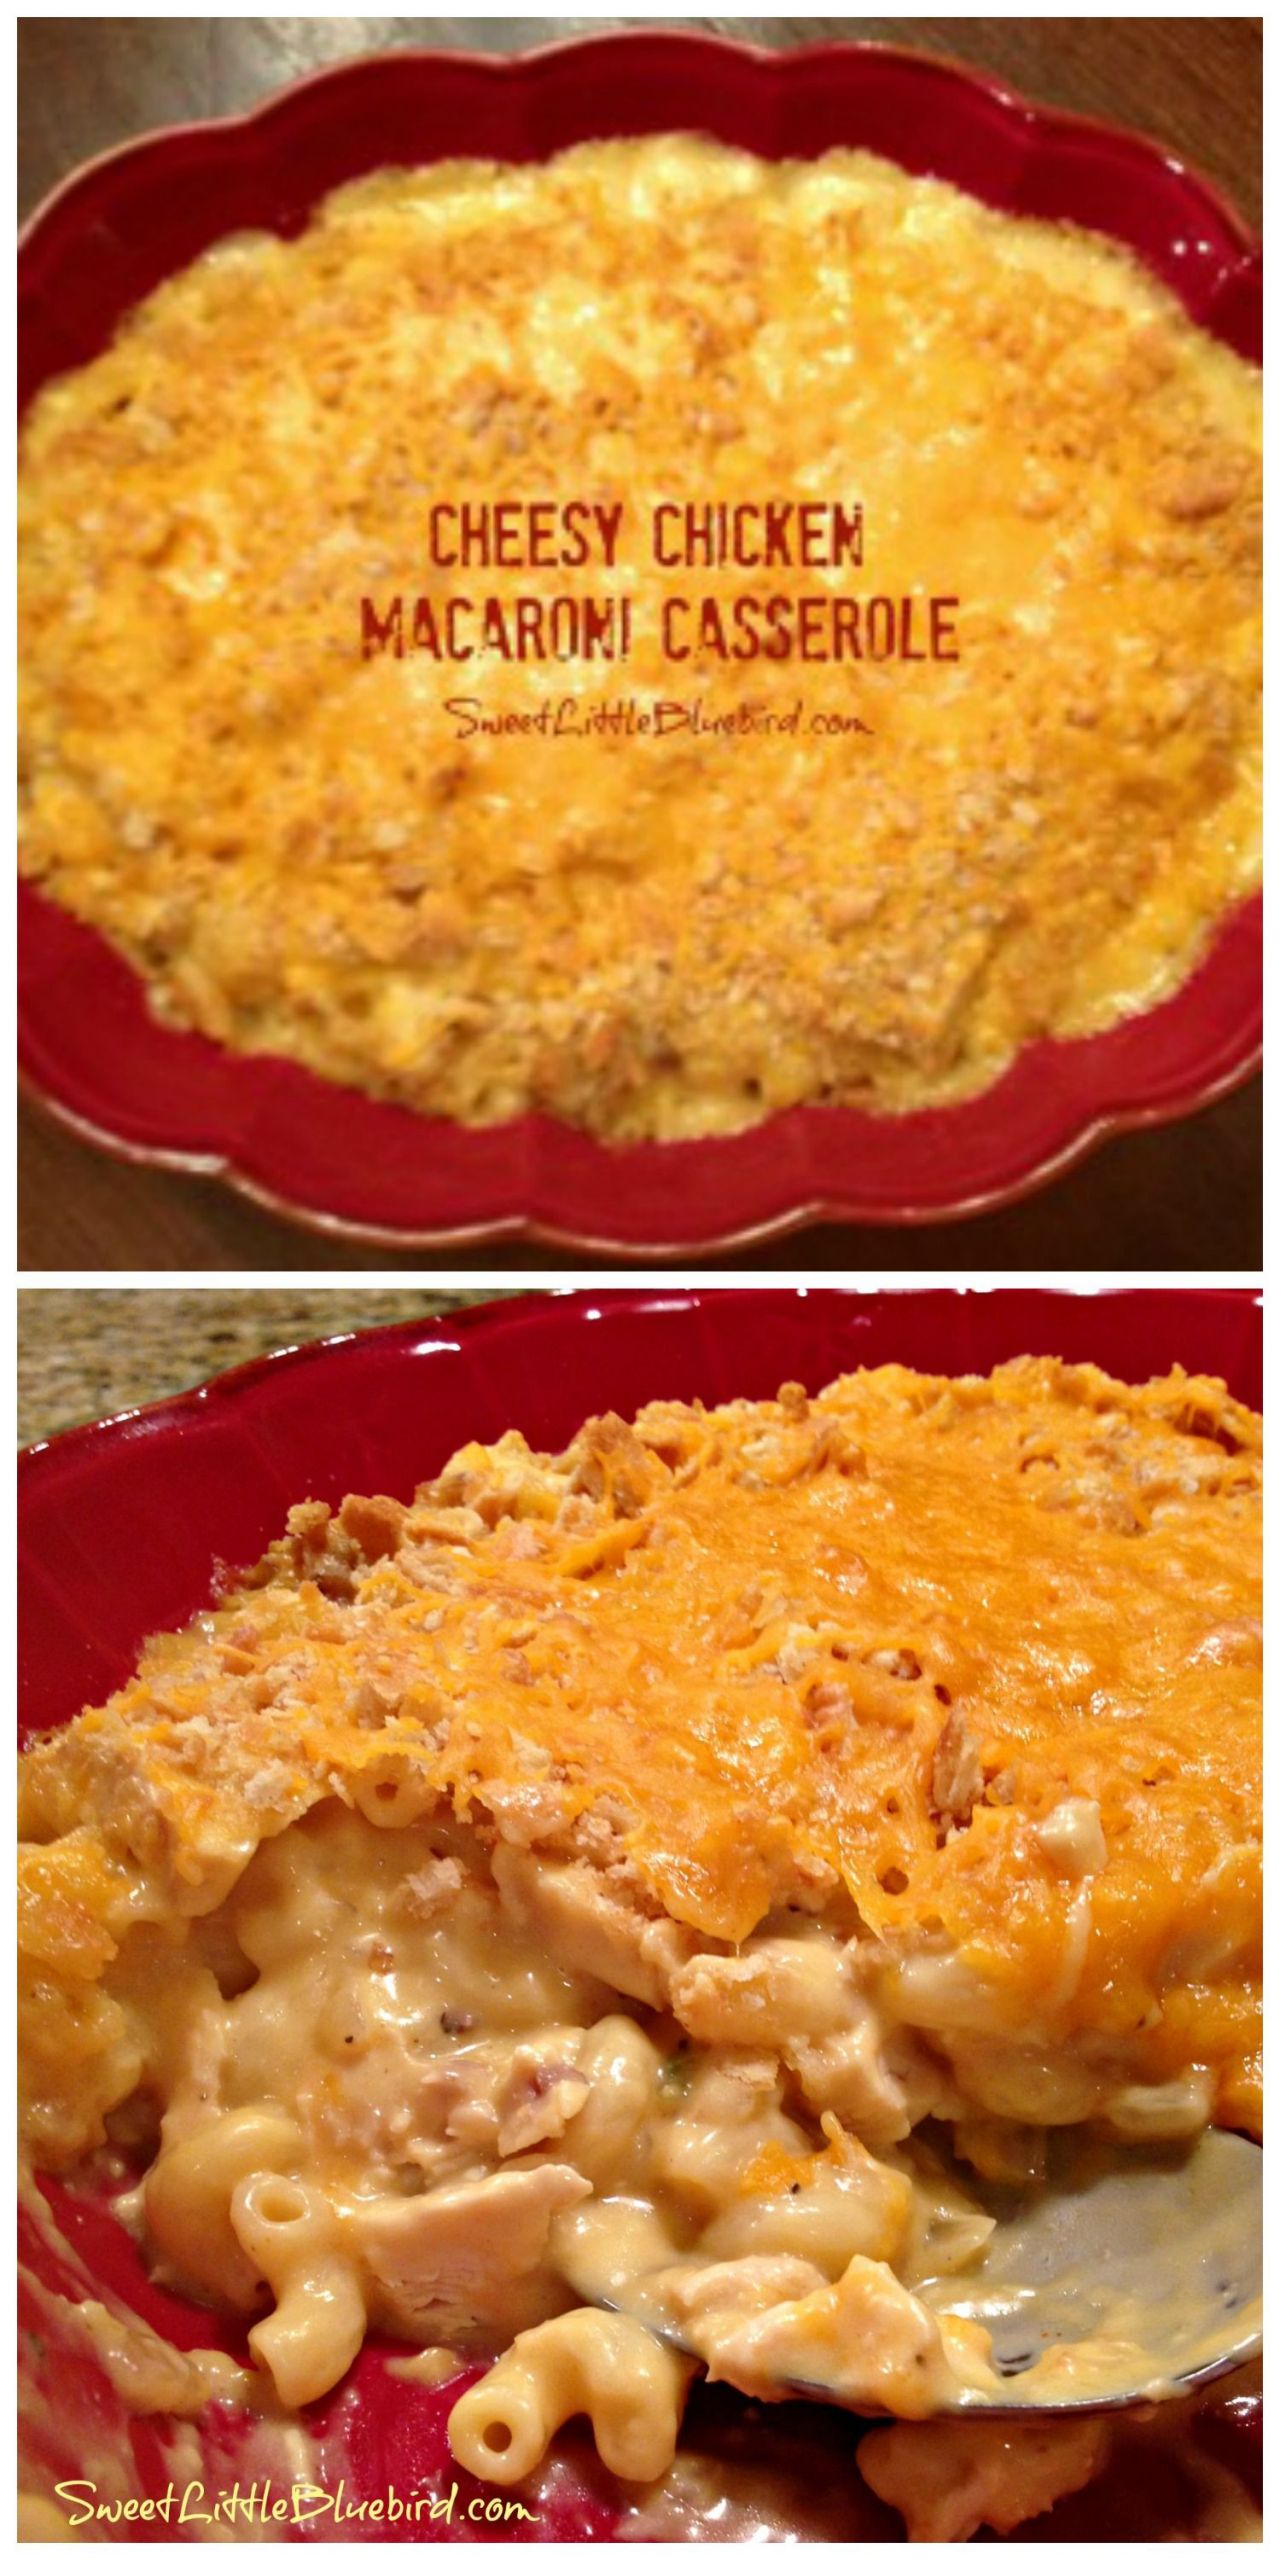 Macaroni And Cheese Casserole With Chicken
 Cheesy Chicken Macaroni Casserole